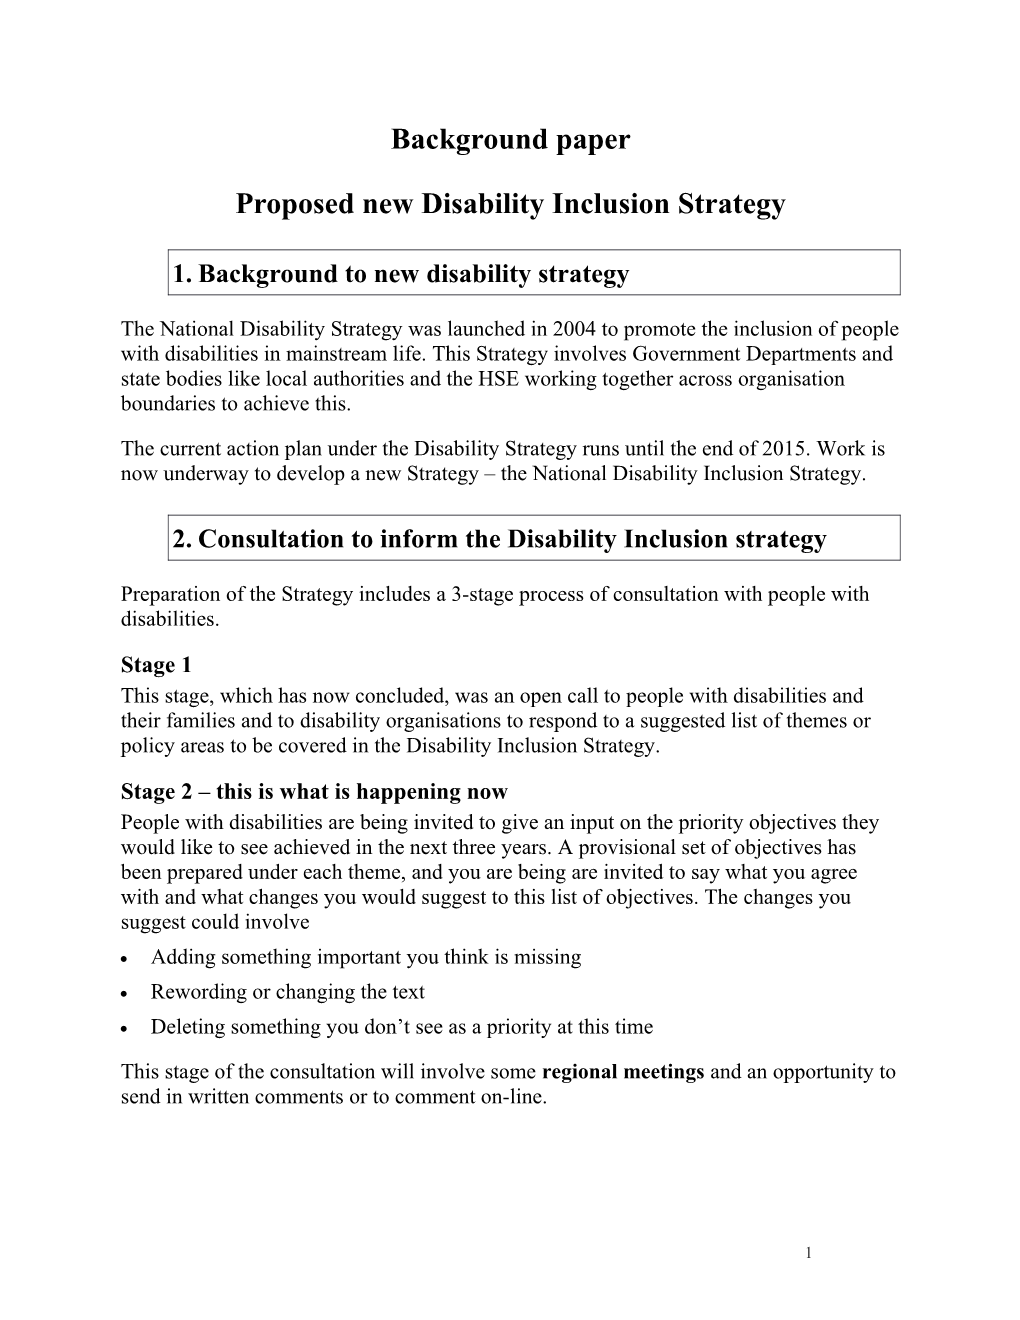 Proposed New Disability Inclusion Strategy